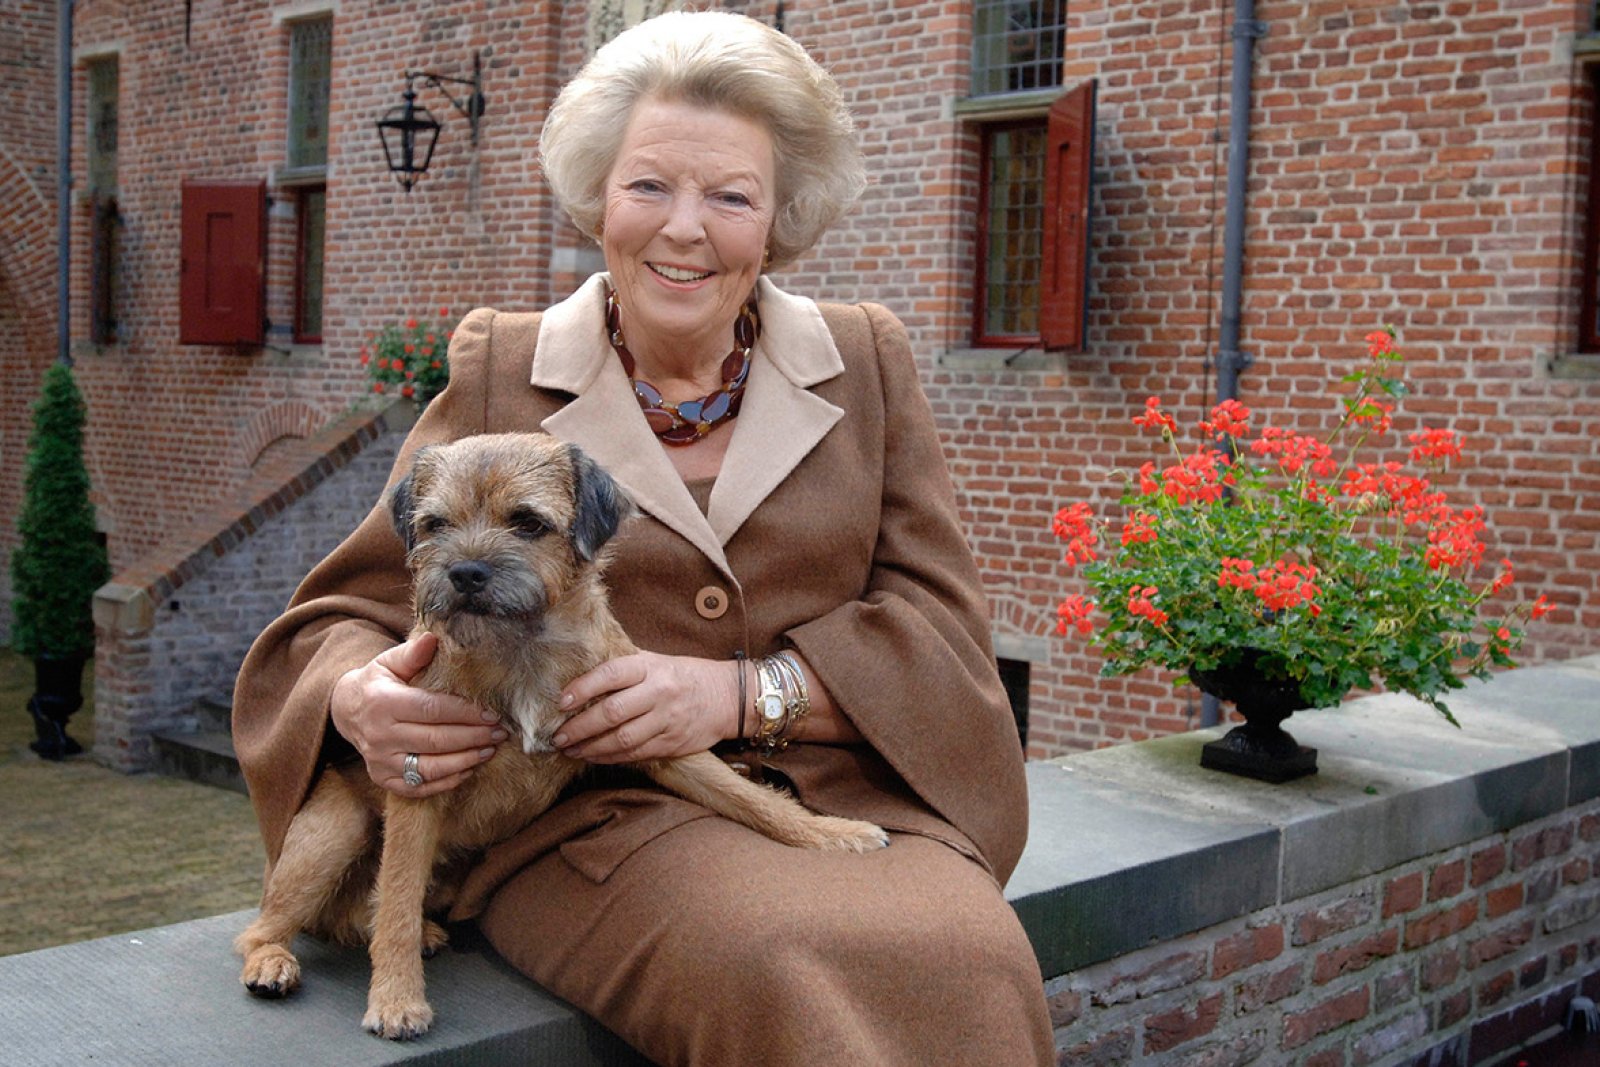 Prinsess Beatrix with her dog